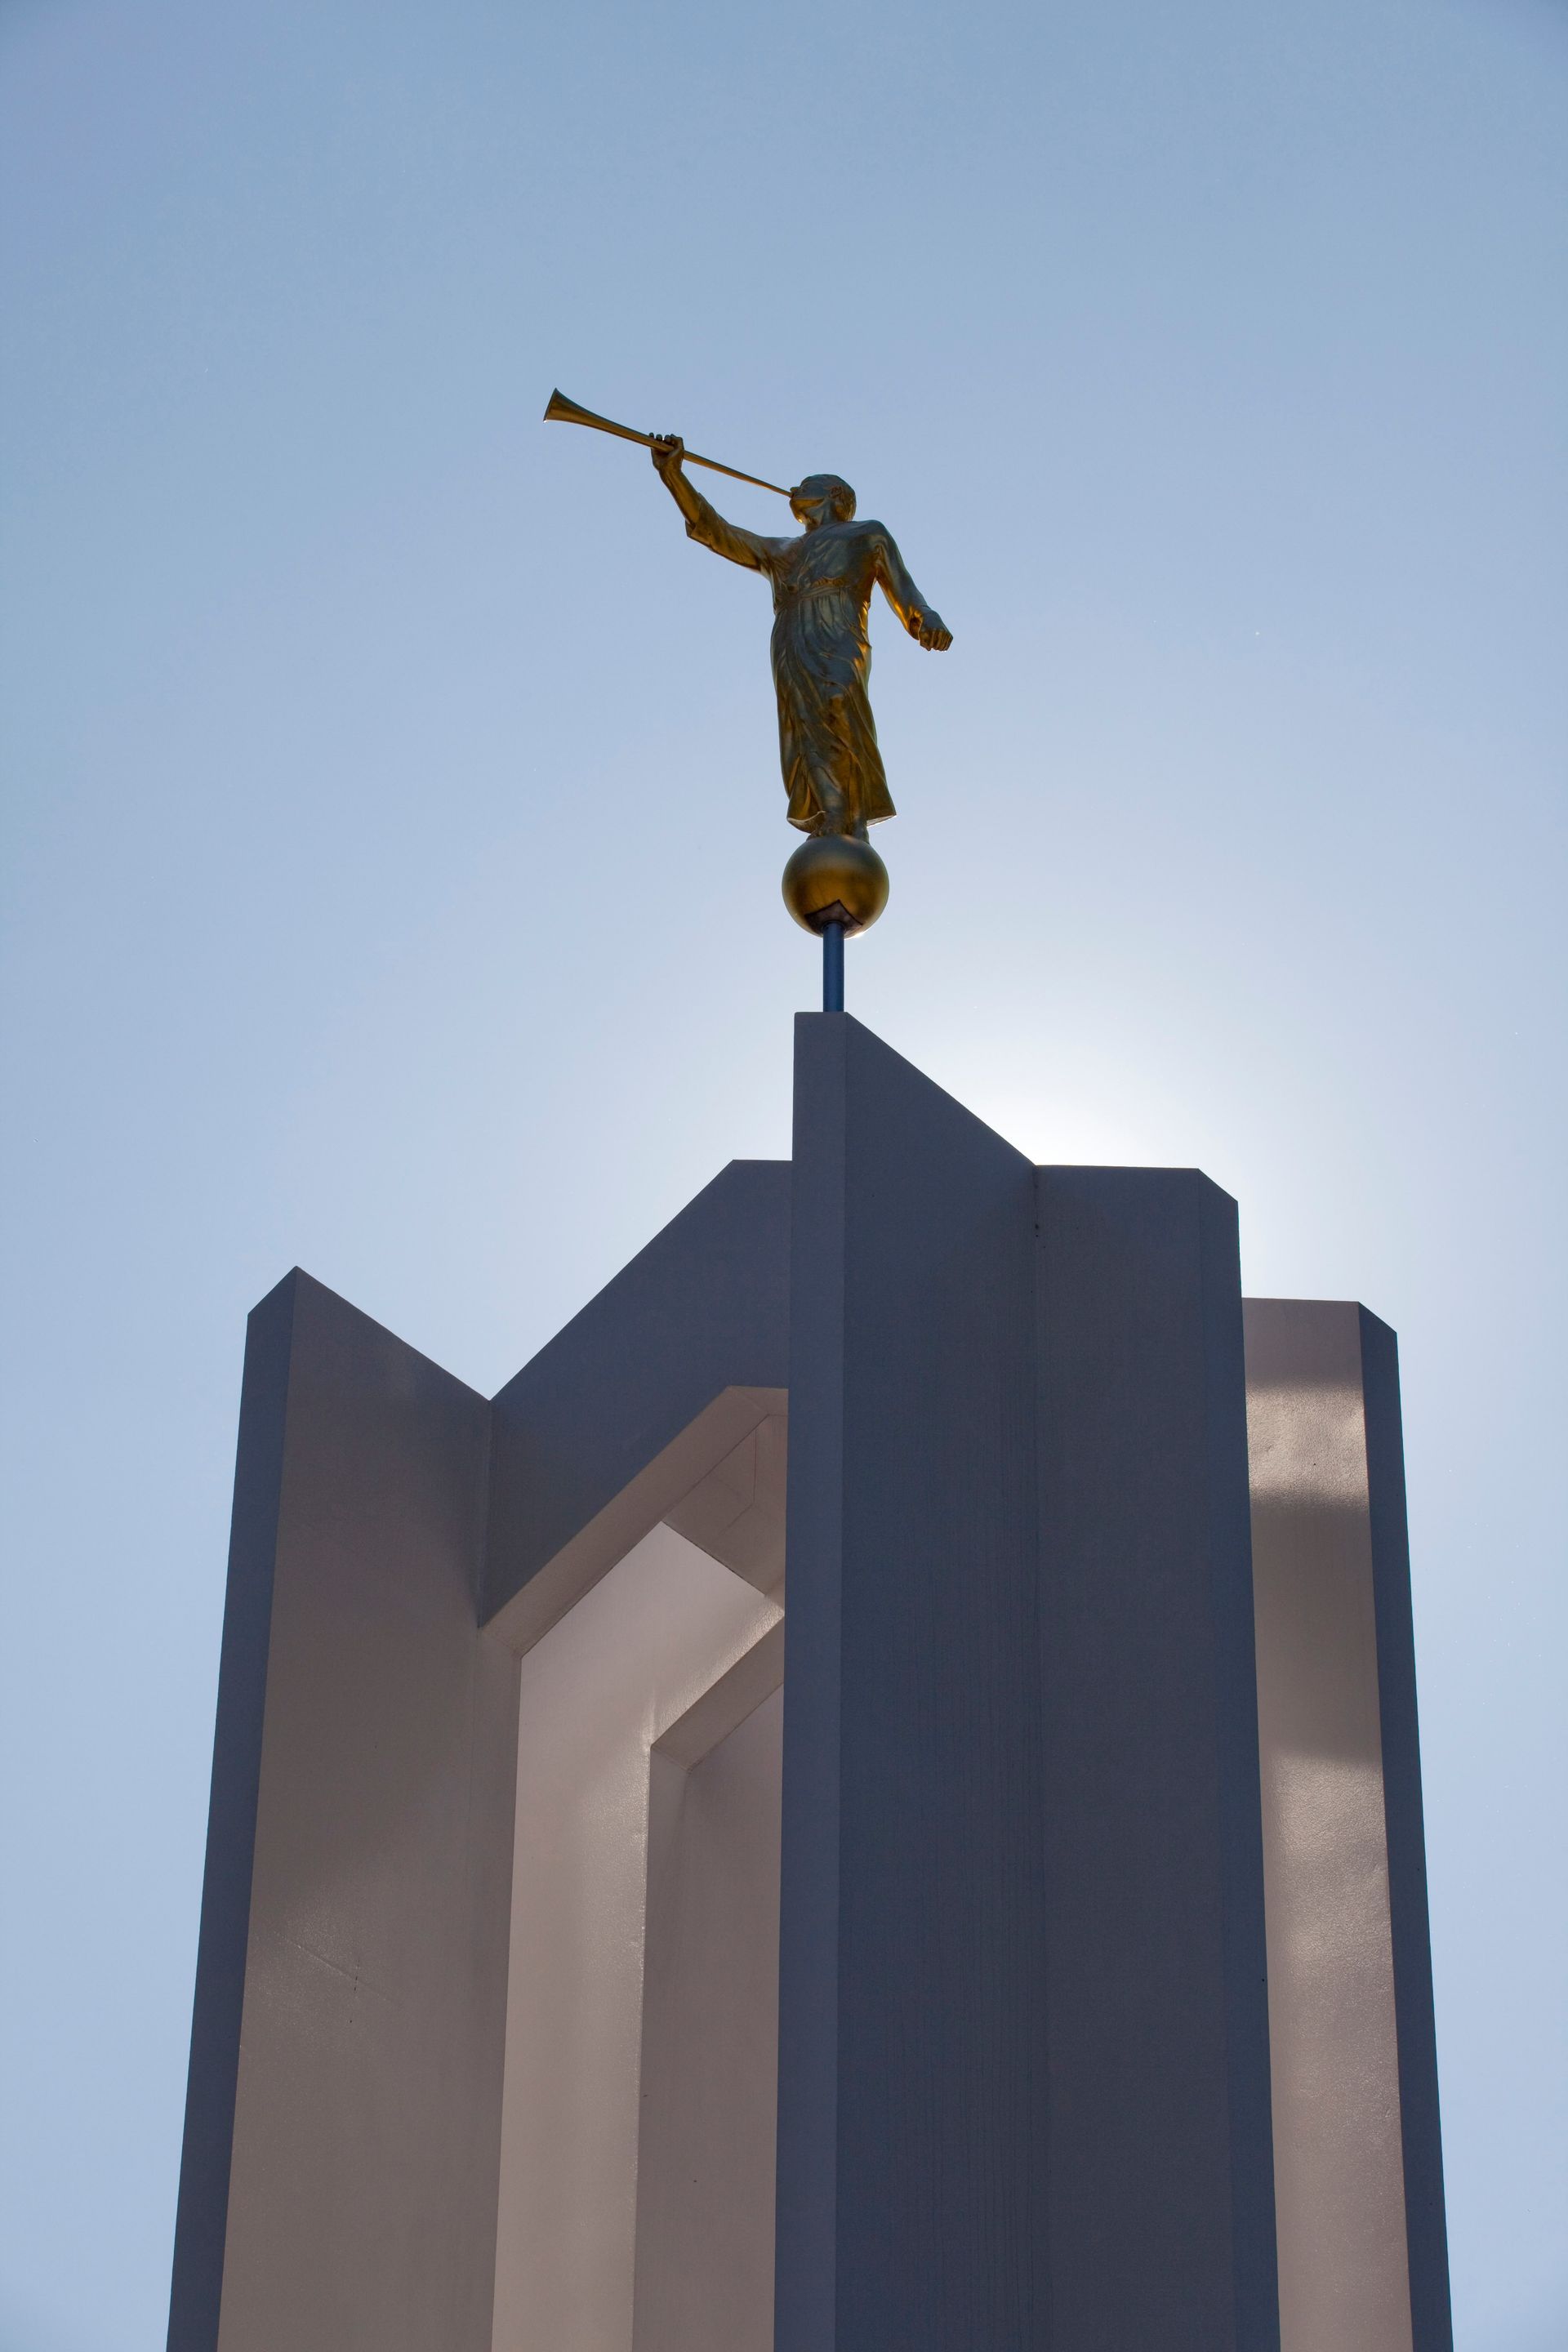 The angel Moroni stands on top of the spire of the Freiberg Germany Temple.  